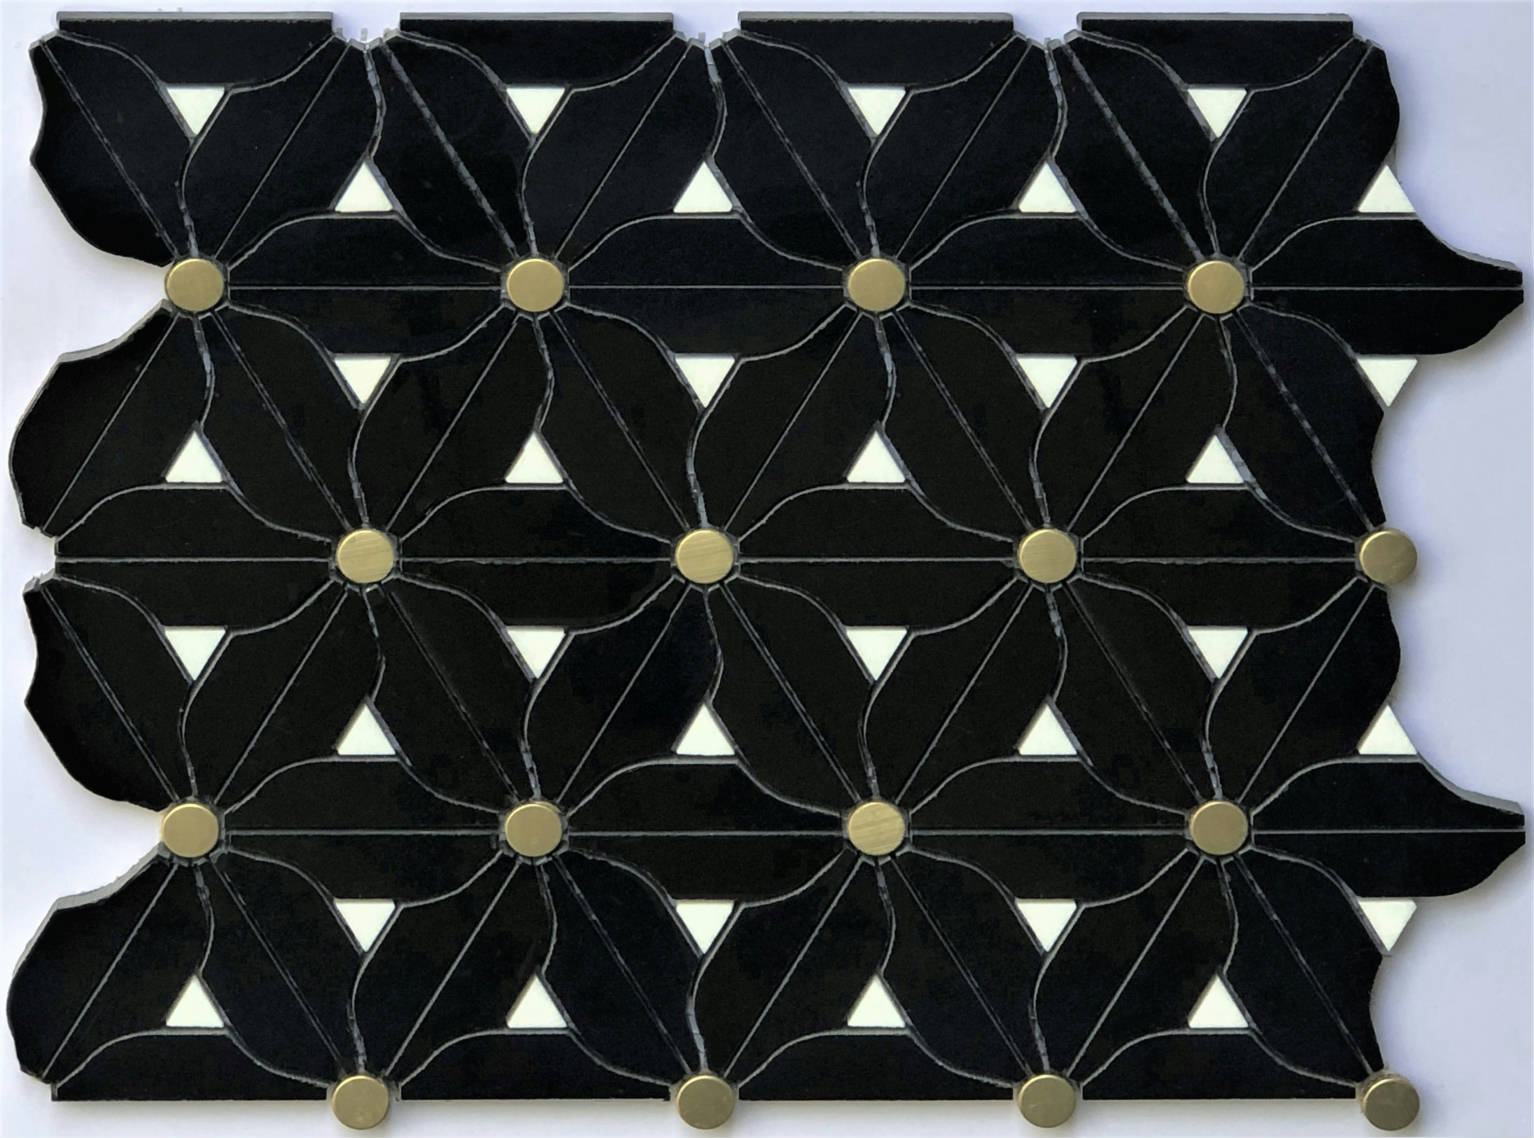 Lily | Stones And More | Finest selection of Mosaics, Glass, Tile and Stone